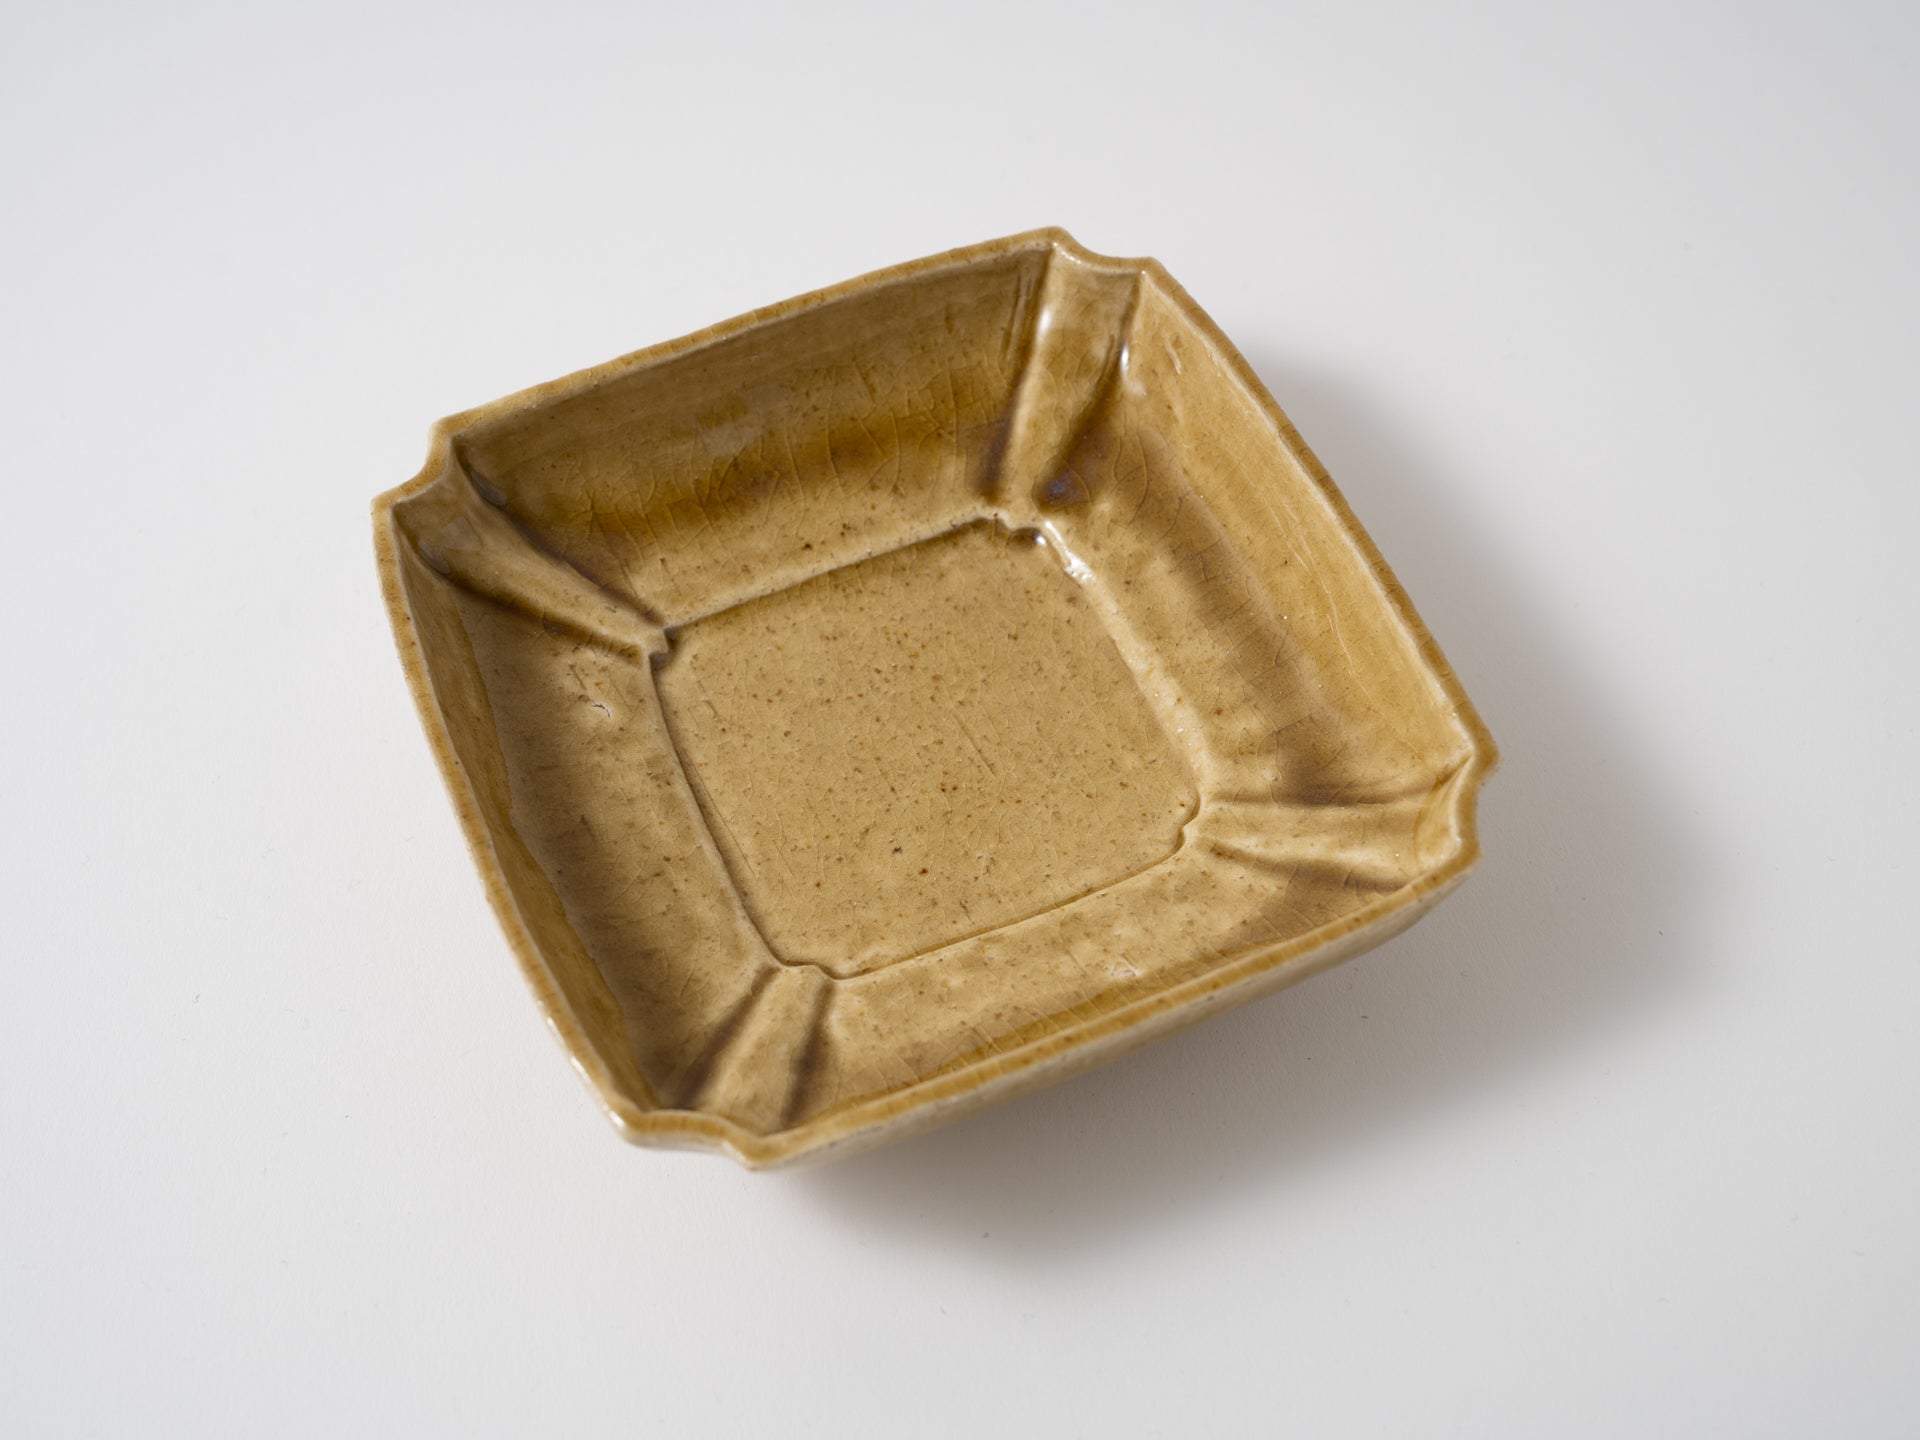 Yellow mulberry glaze with four directions [Kanae Nomura]